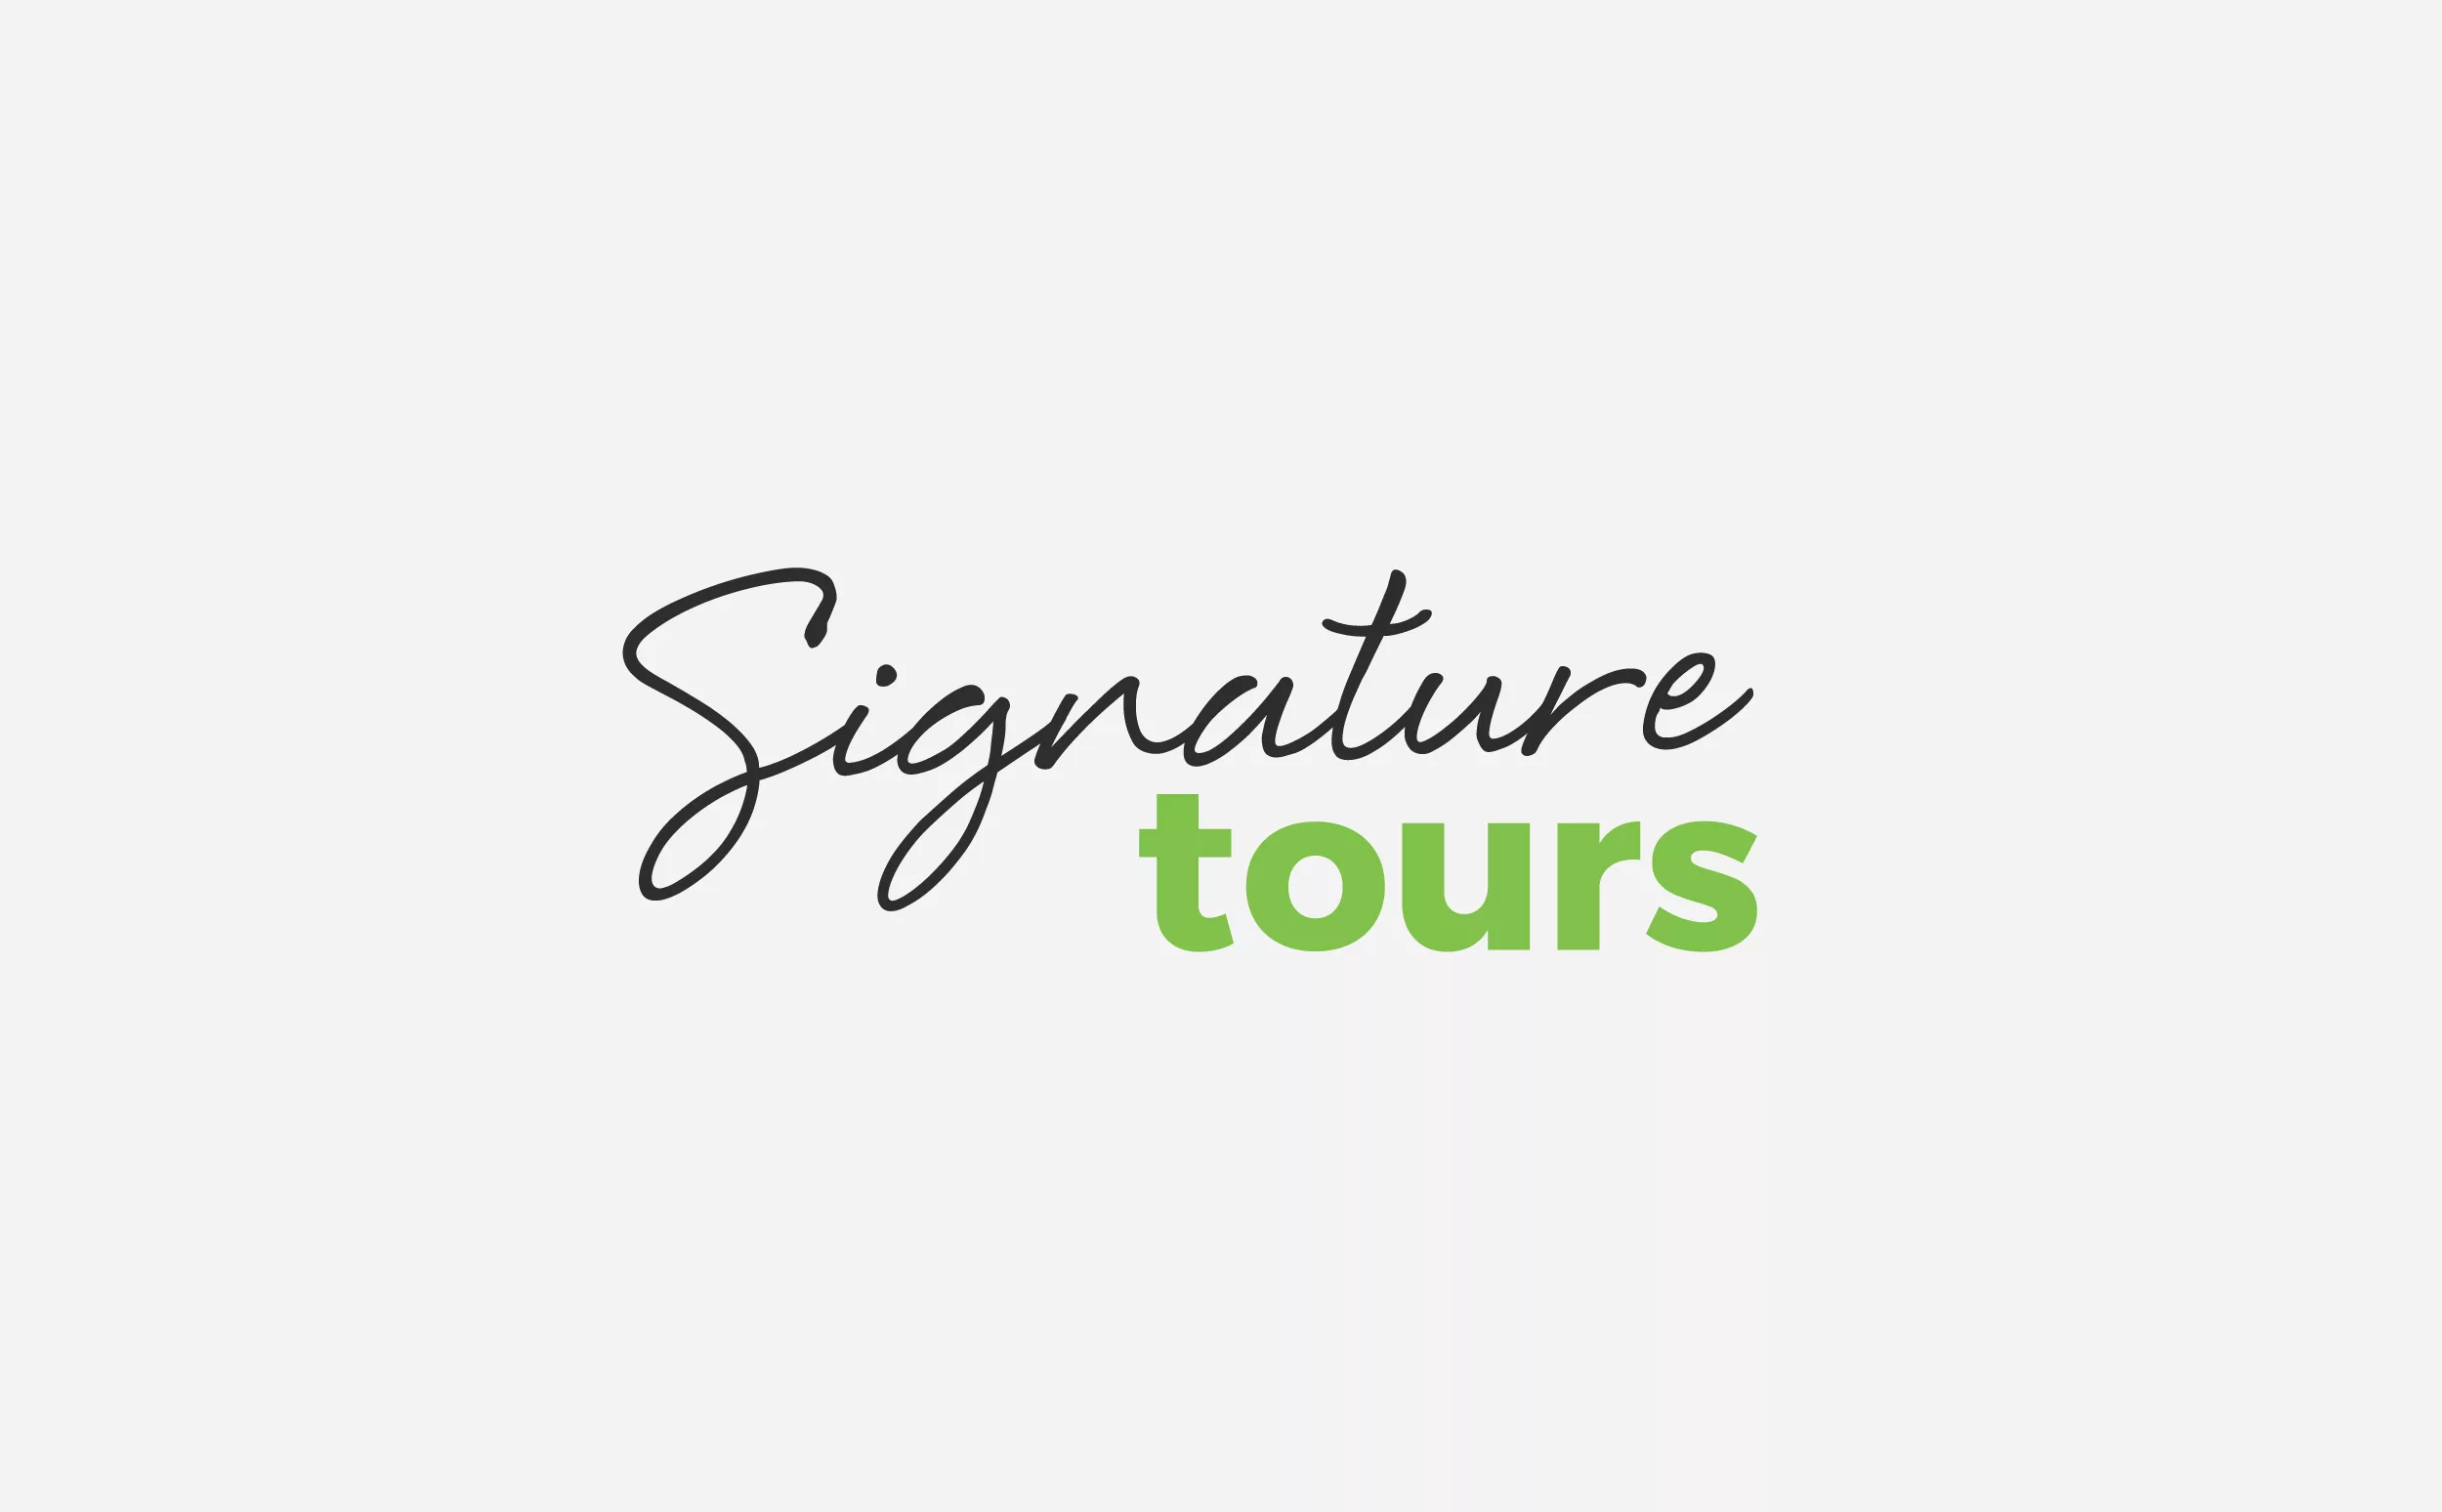 Signature Tours from the Great Projects by Peek Creative Limited